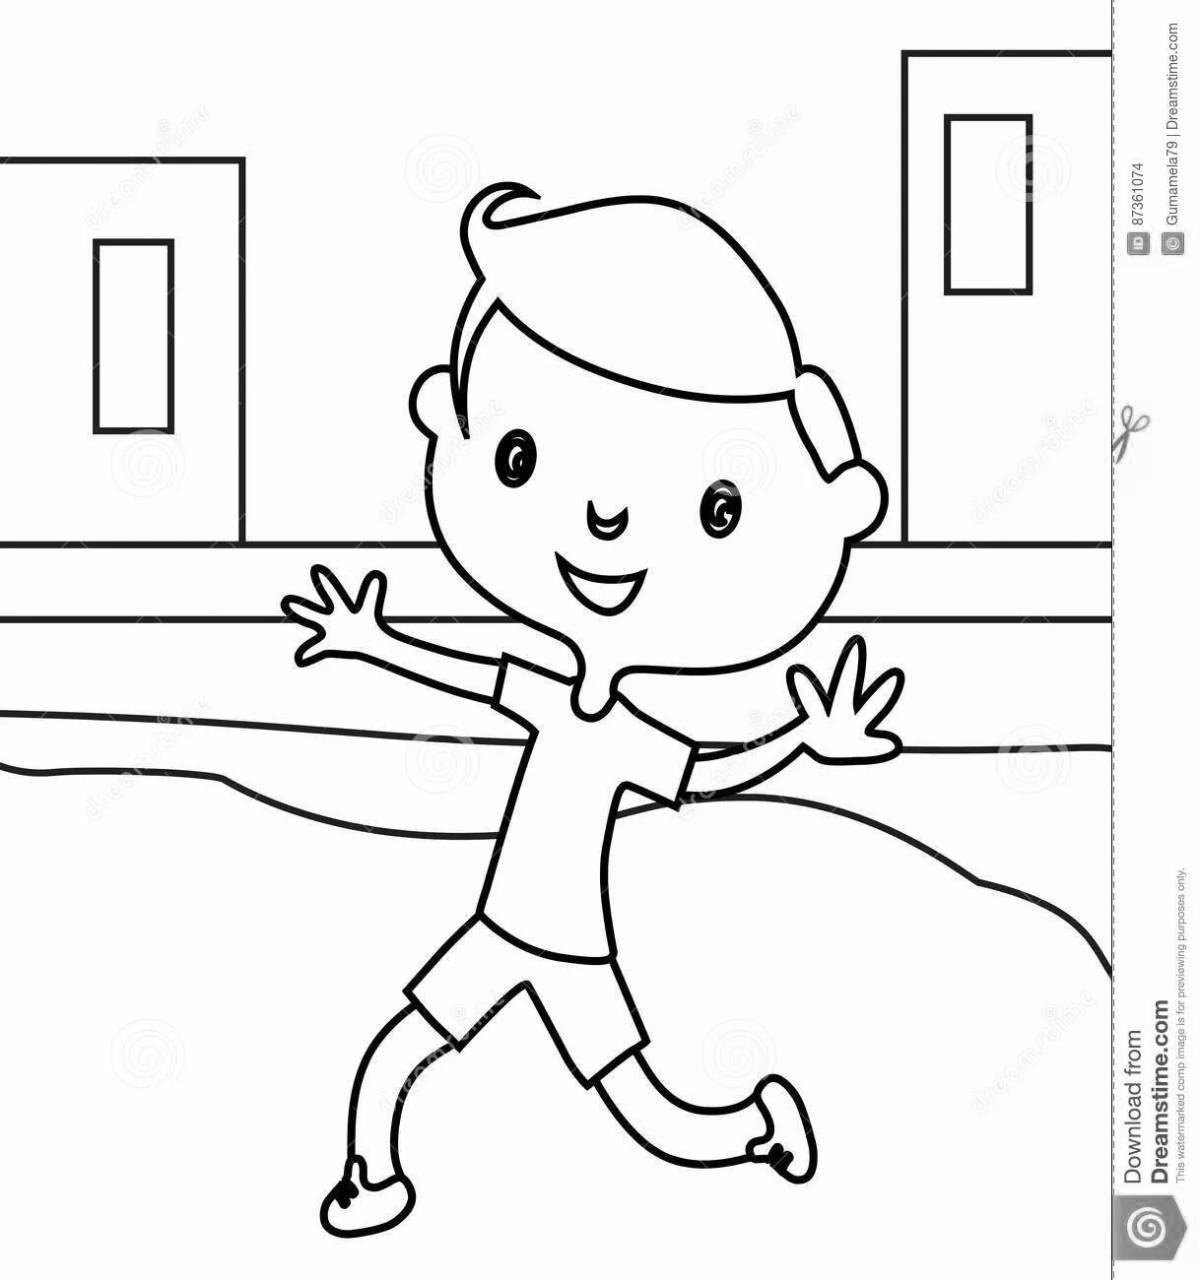 Animated boy running coloring book